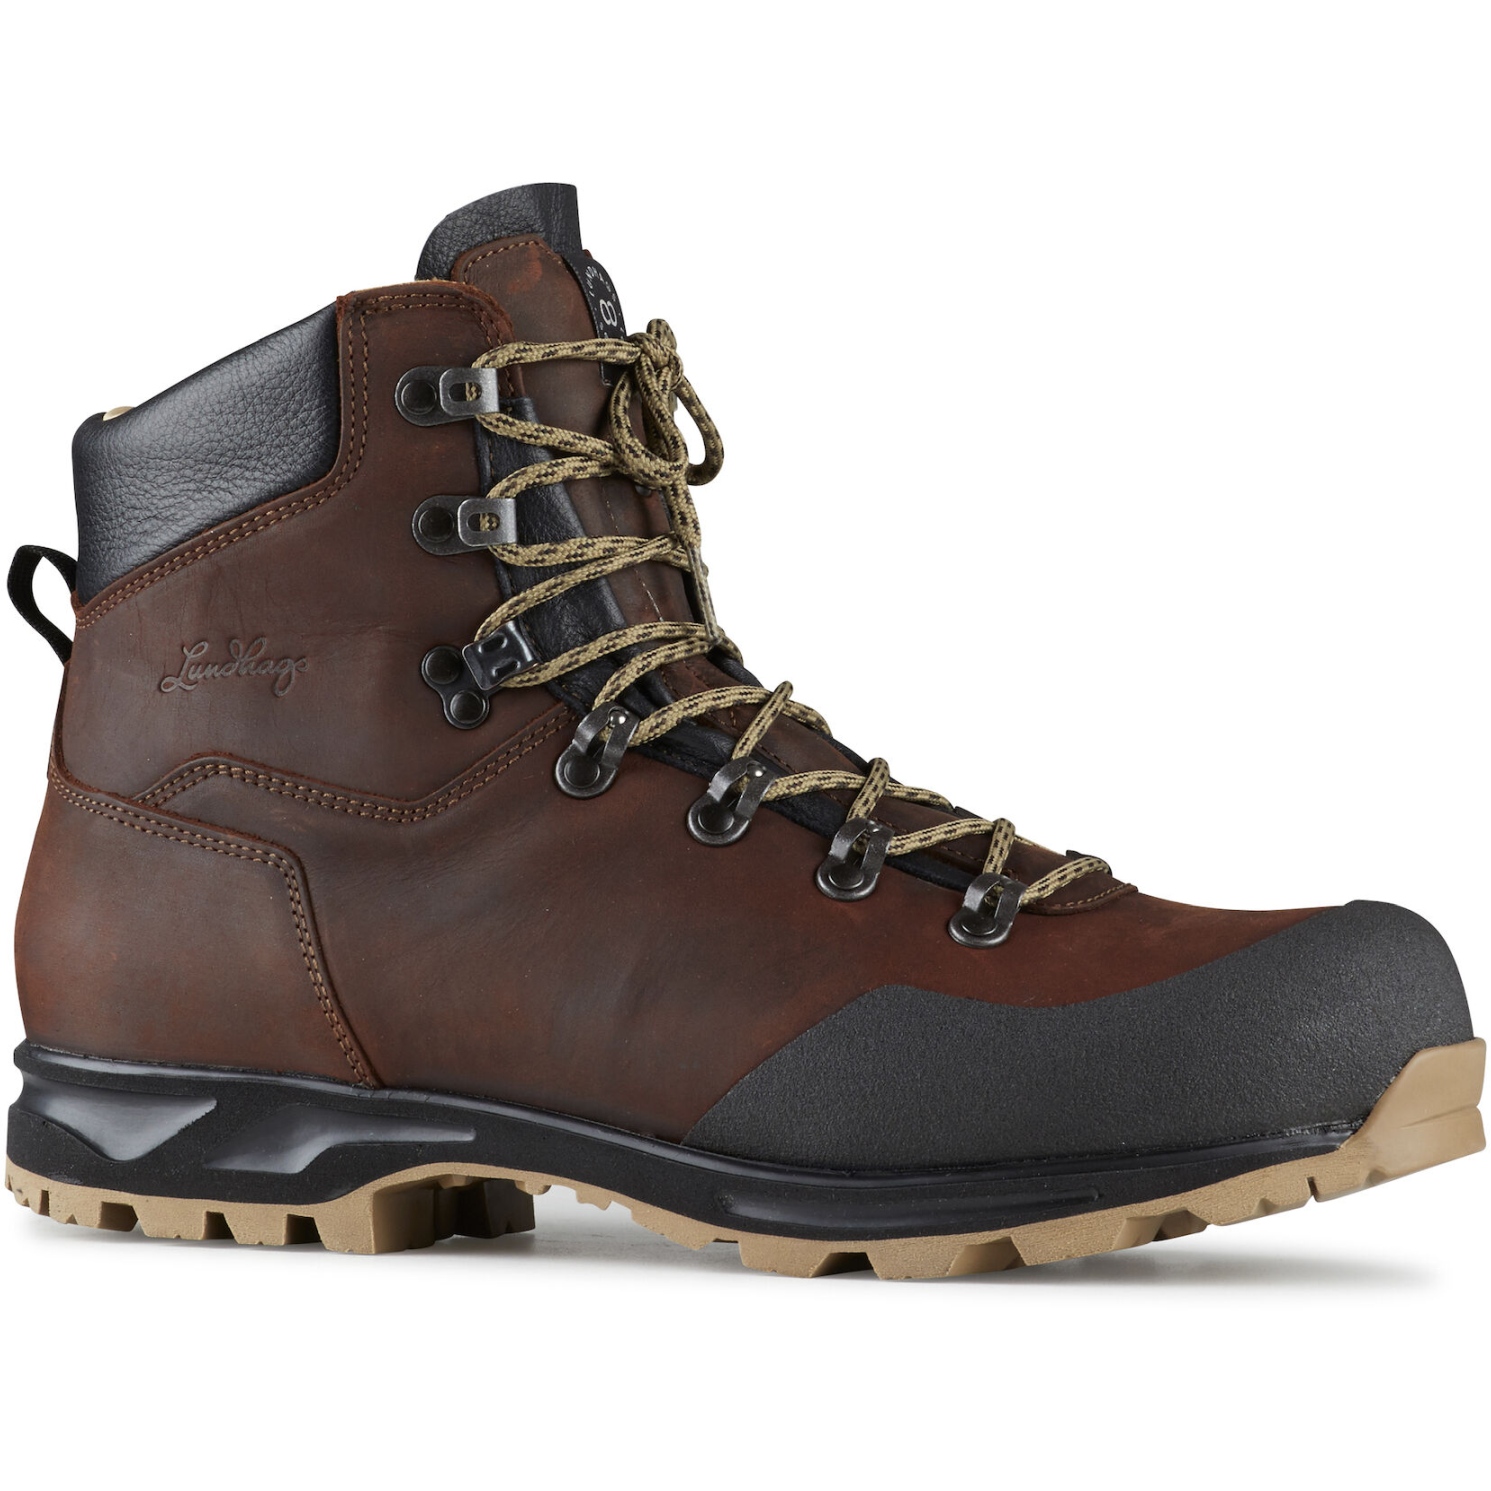 Picture of Lundhags Stuore Mid Hiking Boots - Chestnut 711